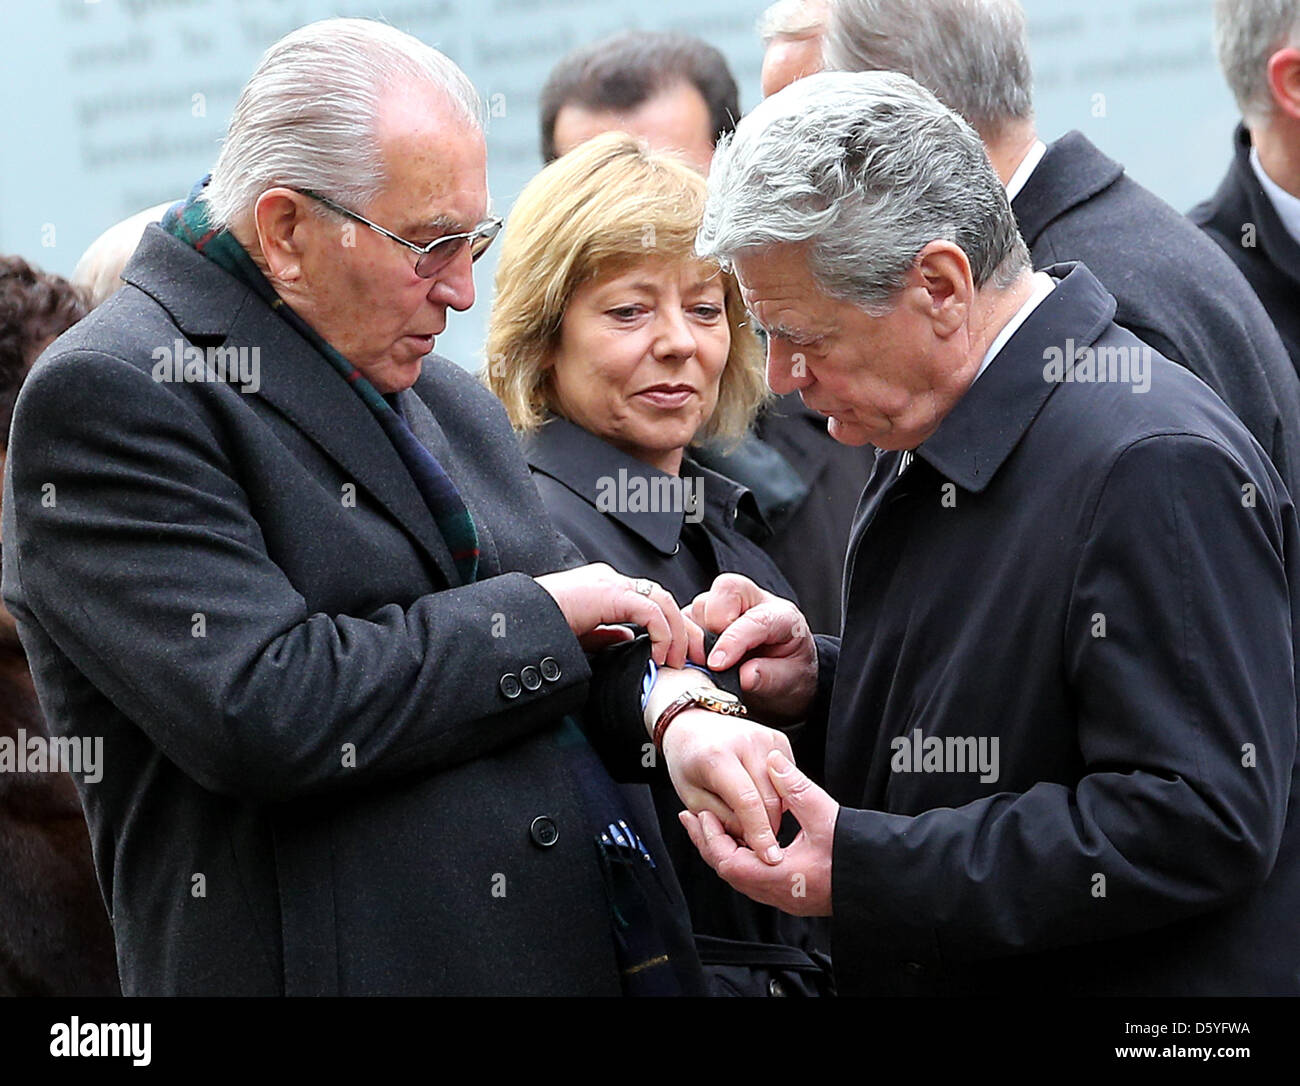 Survivor of the Holocaust Zoni Weisz (L) shows his concentration camp tattoo to German President Joachim Gauck and his partner Daniela Schadt during the inauguration of the memorial to the Sinti and Roma murdered under National Socialism in Berlin, Germany, 24 October 2012. German chancellor Angela Merkel is mirrored in the center. Around 70 years after the end of World War II the  Stock Photo